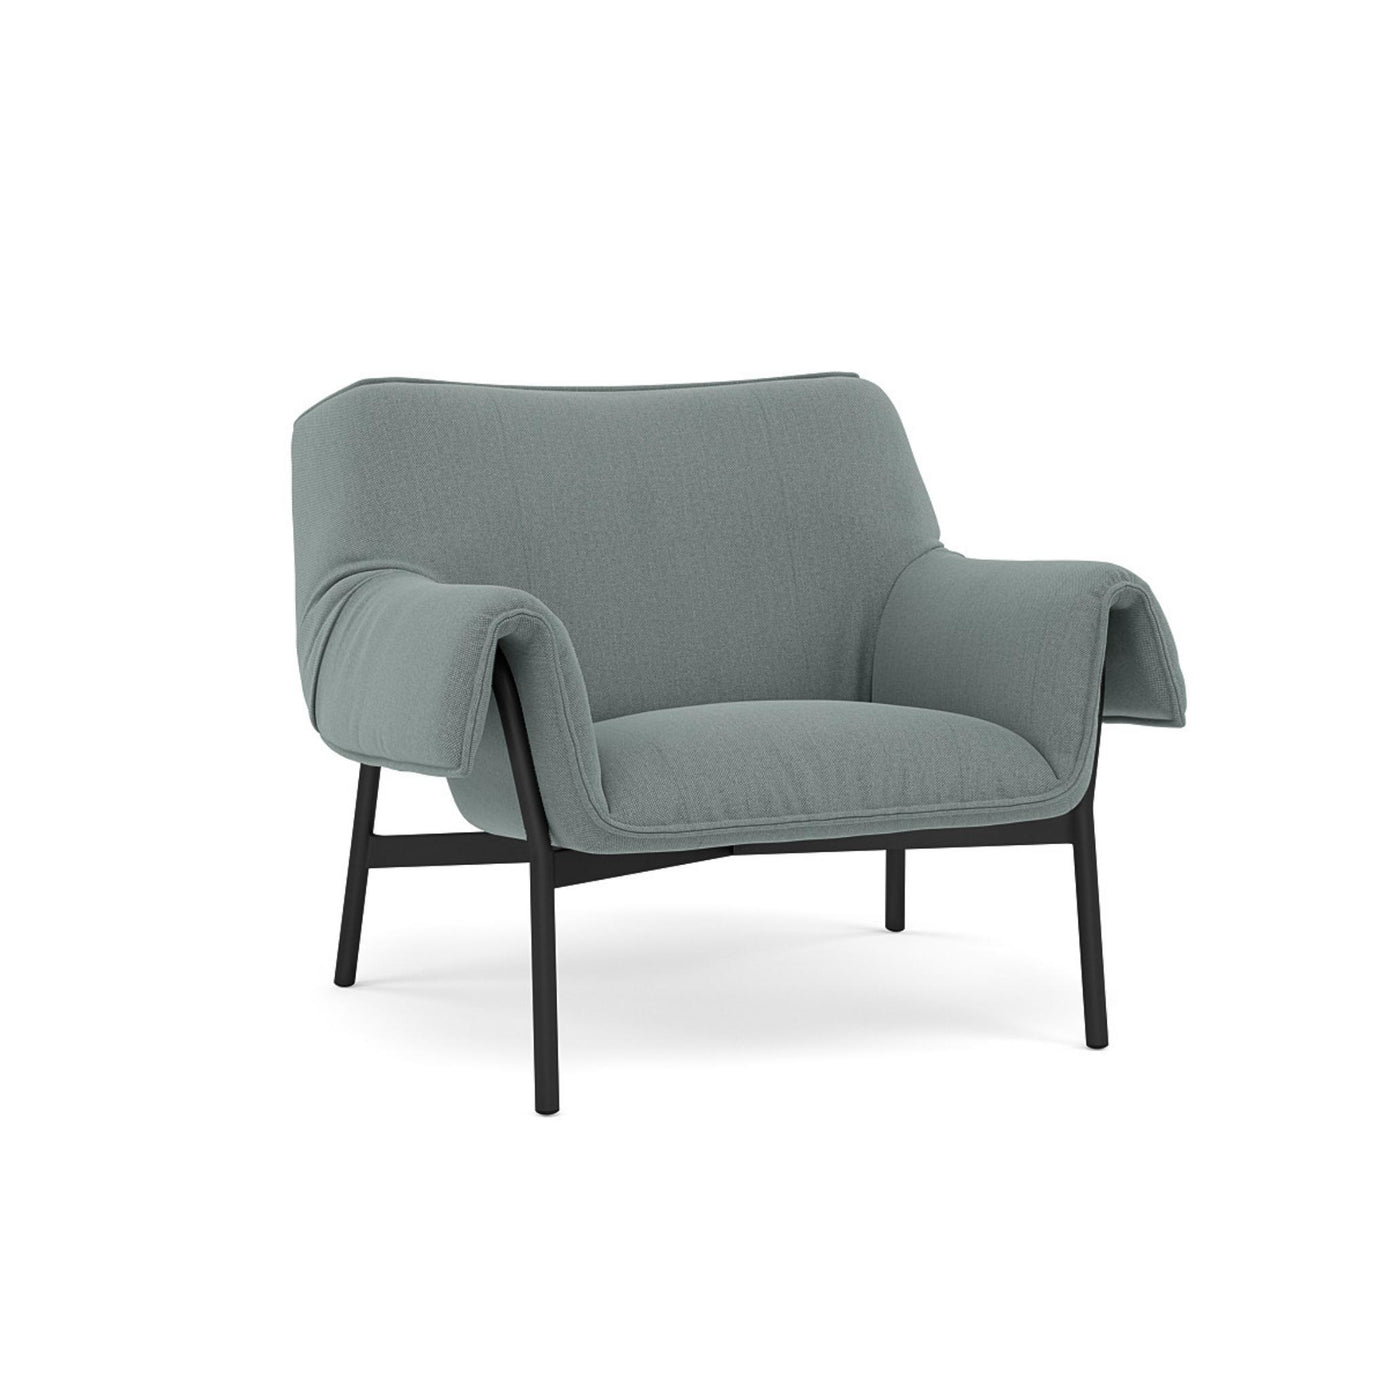 Muuto Wrap Lounge Chair. Made to order from someday designs. #colour_re-wool-868